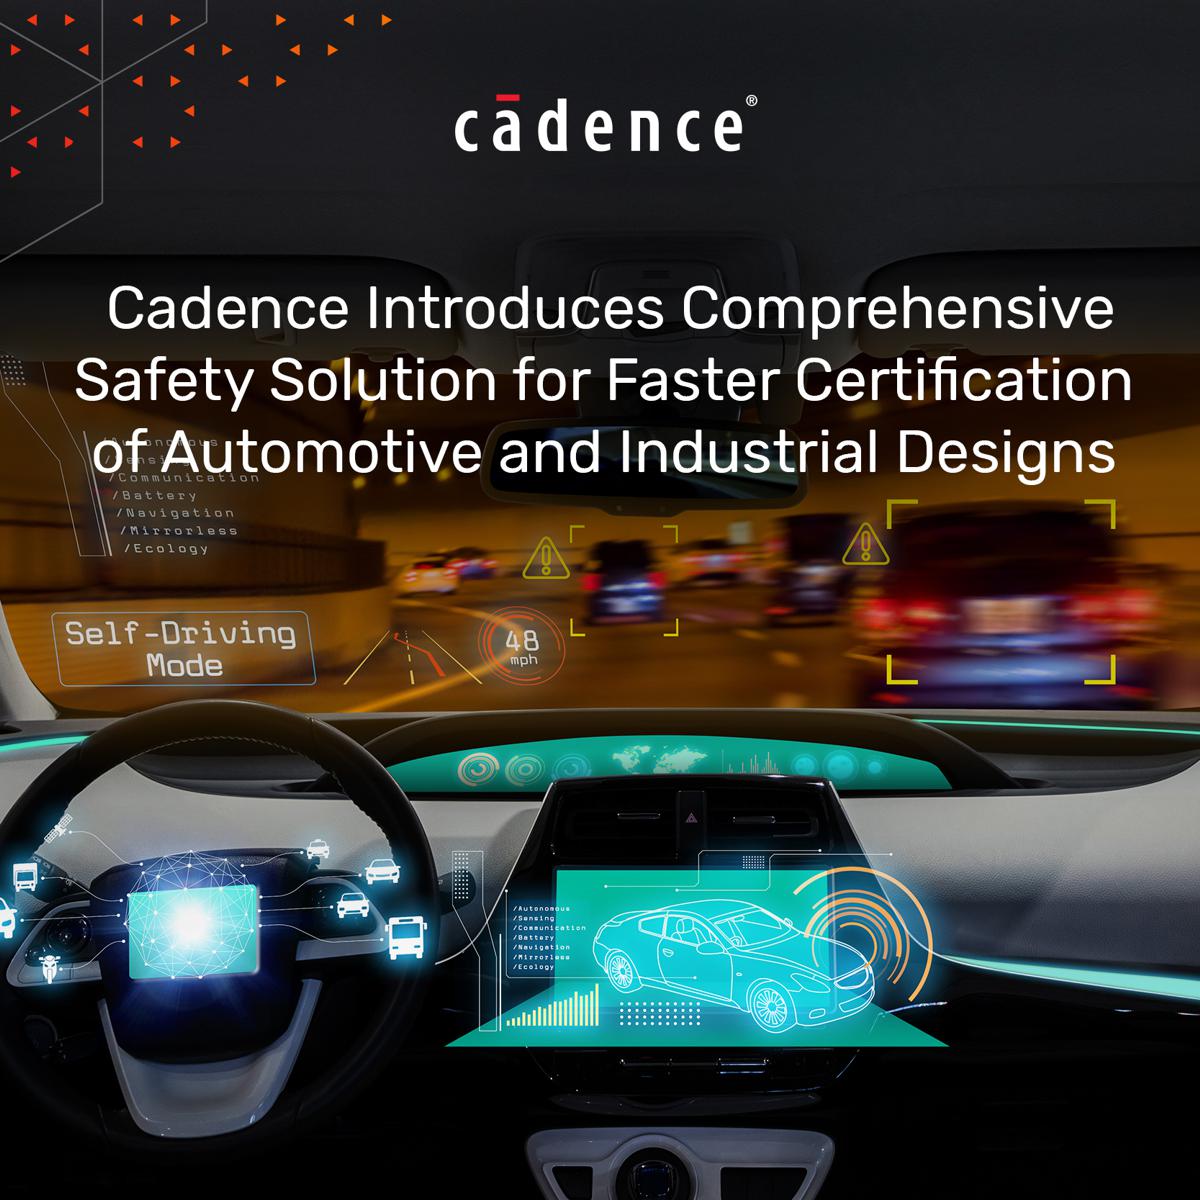 Cadence Safety Solution delivers faster certification of Automotive and Industrial Designs